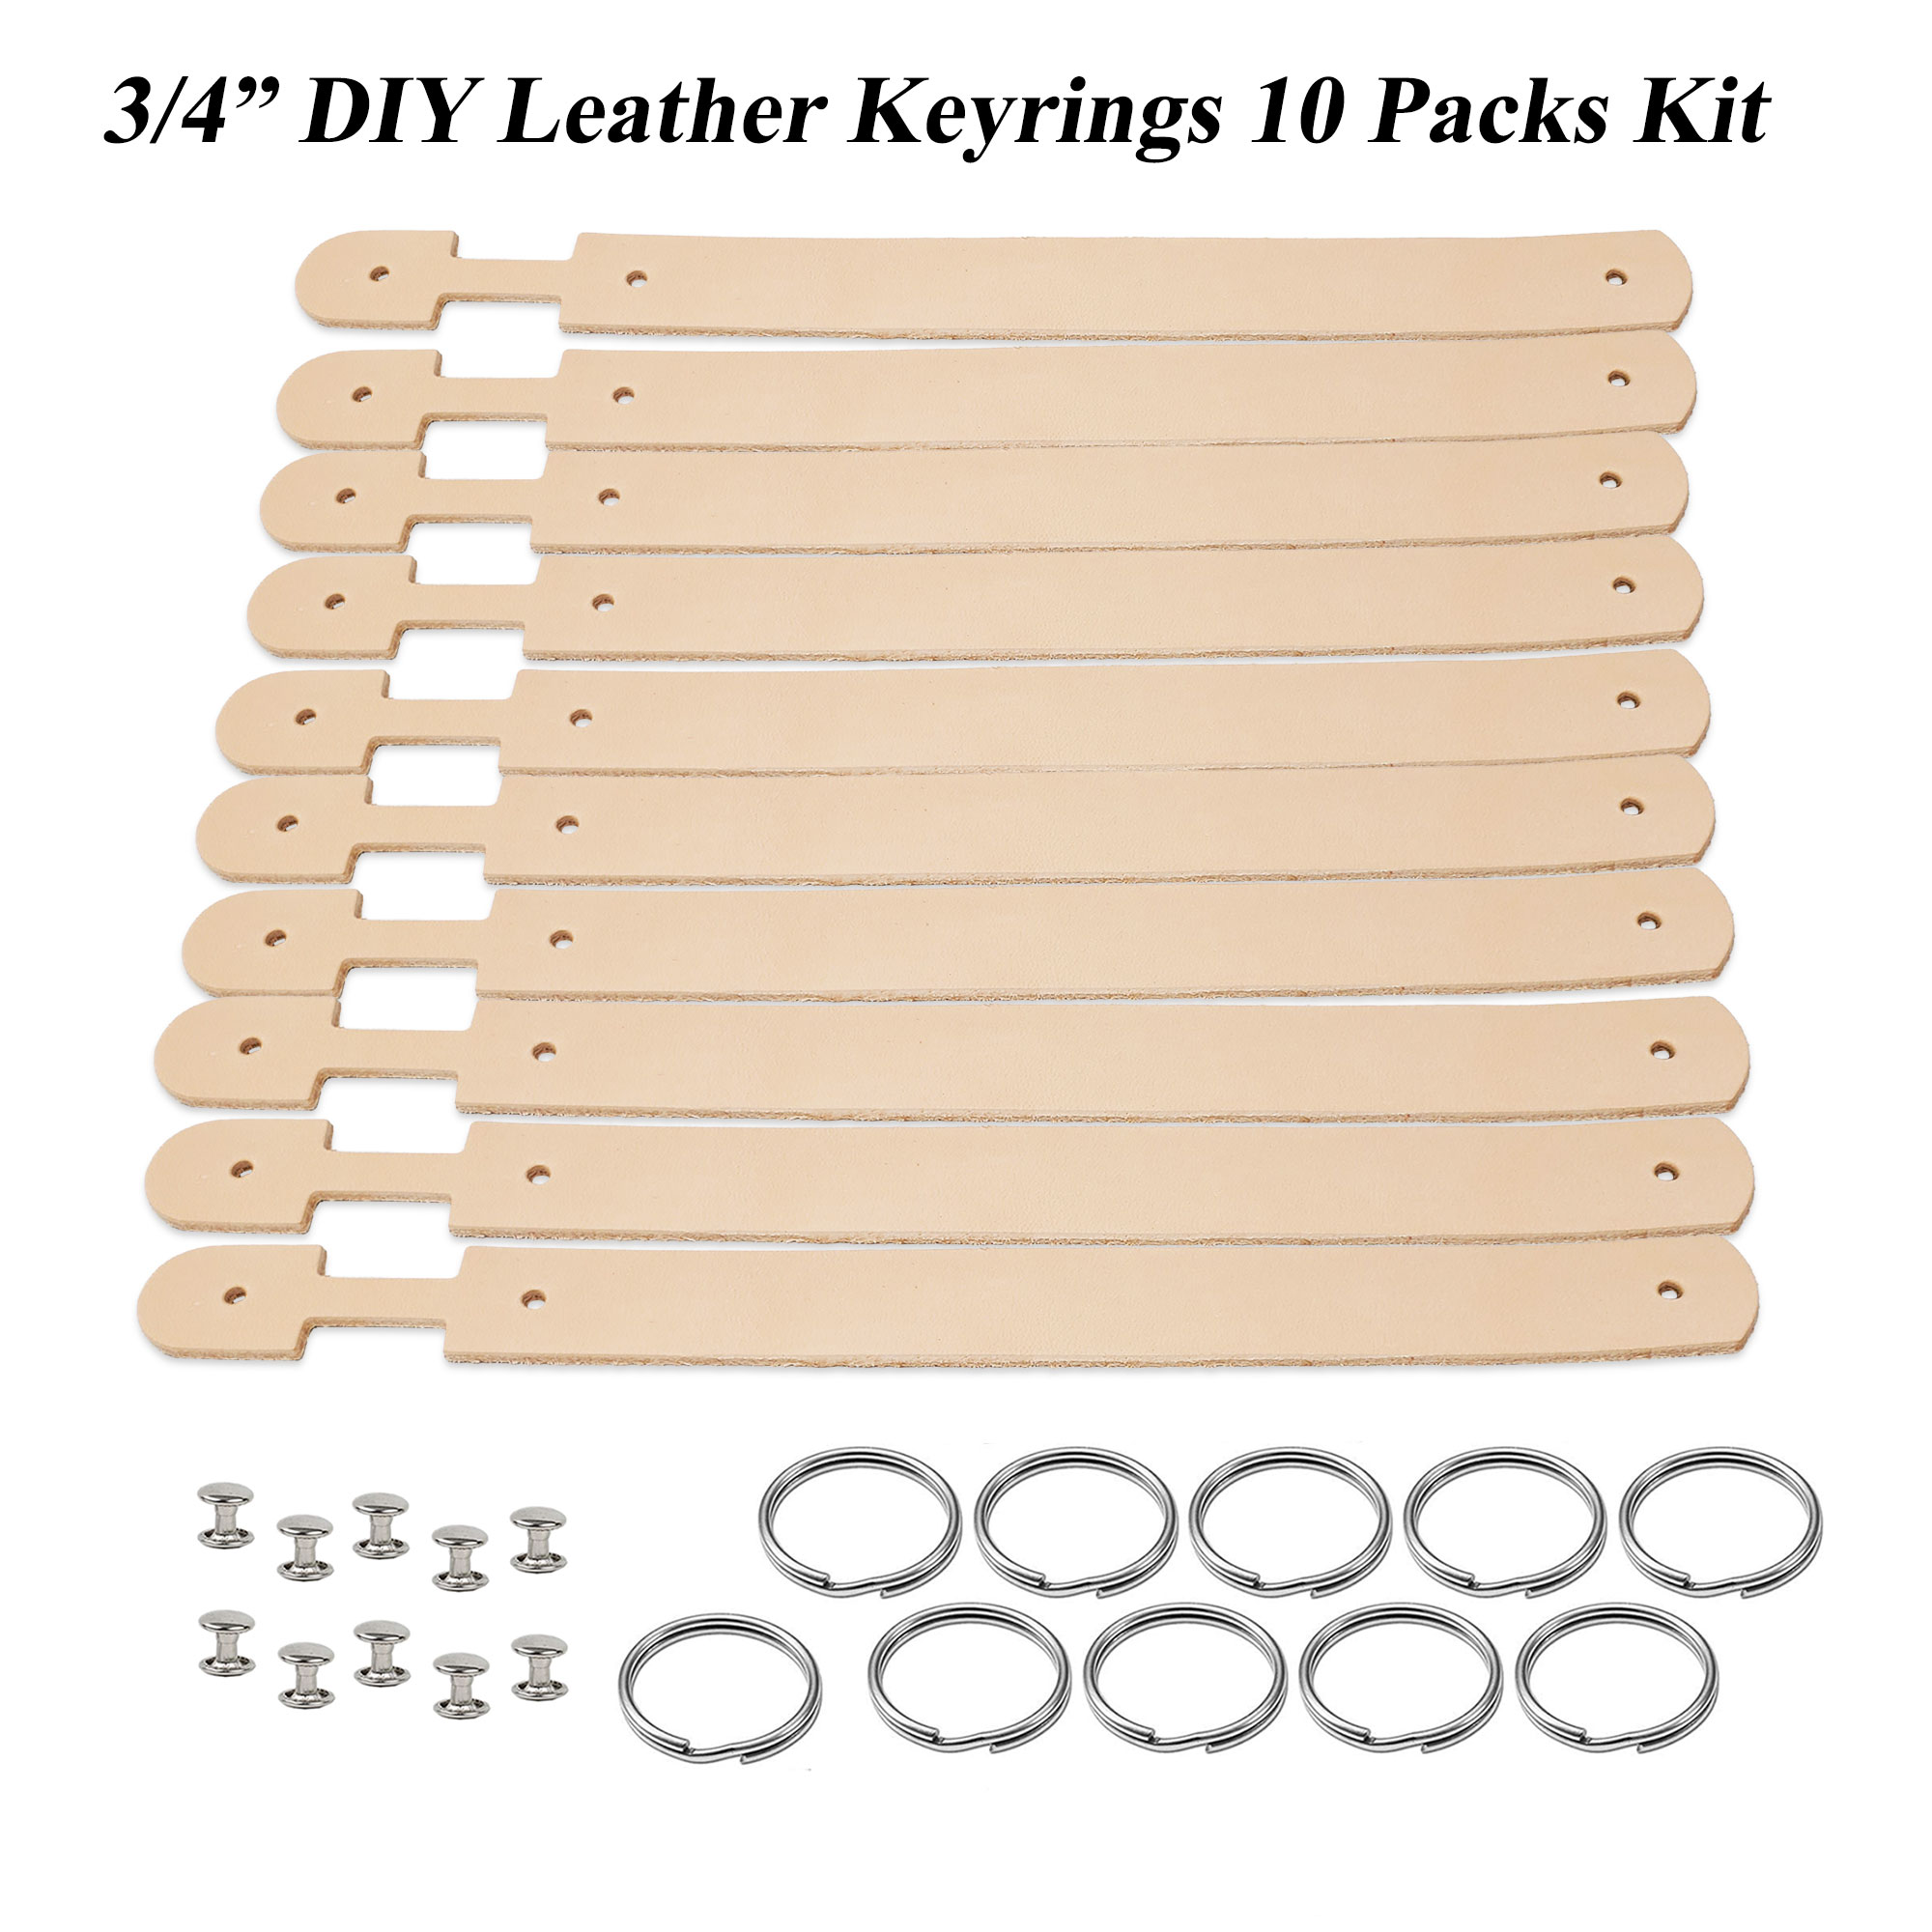 10 Pack Leather Keychains - Tooling/Engraving Ready Natural Blank KeyFobs